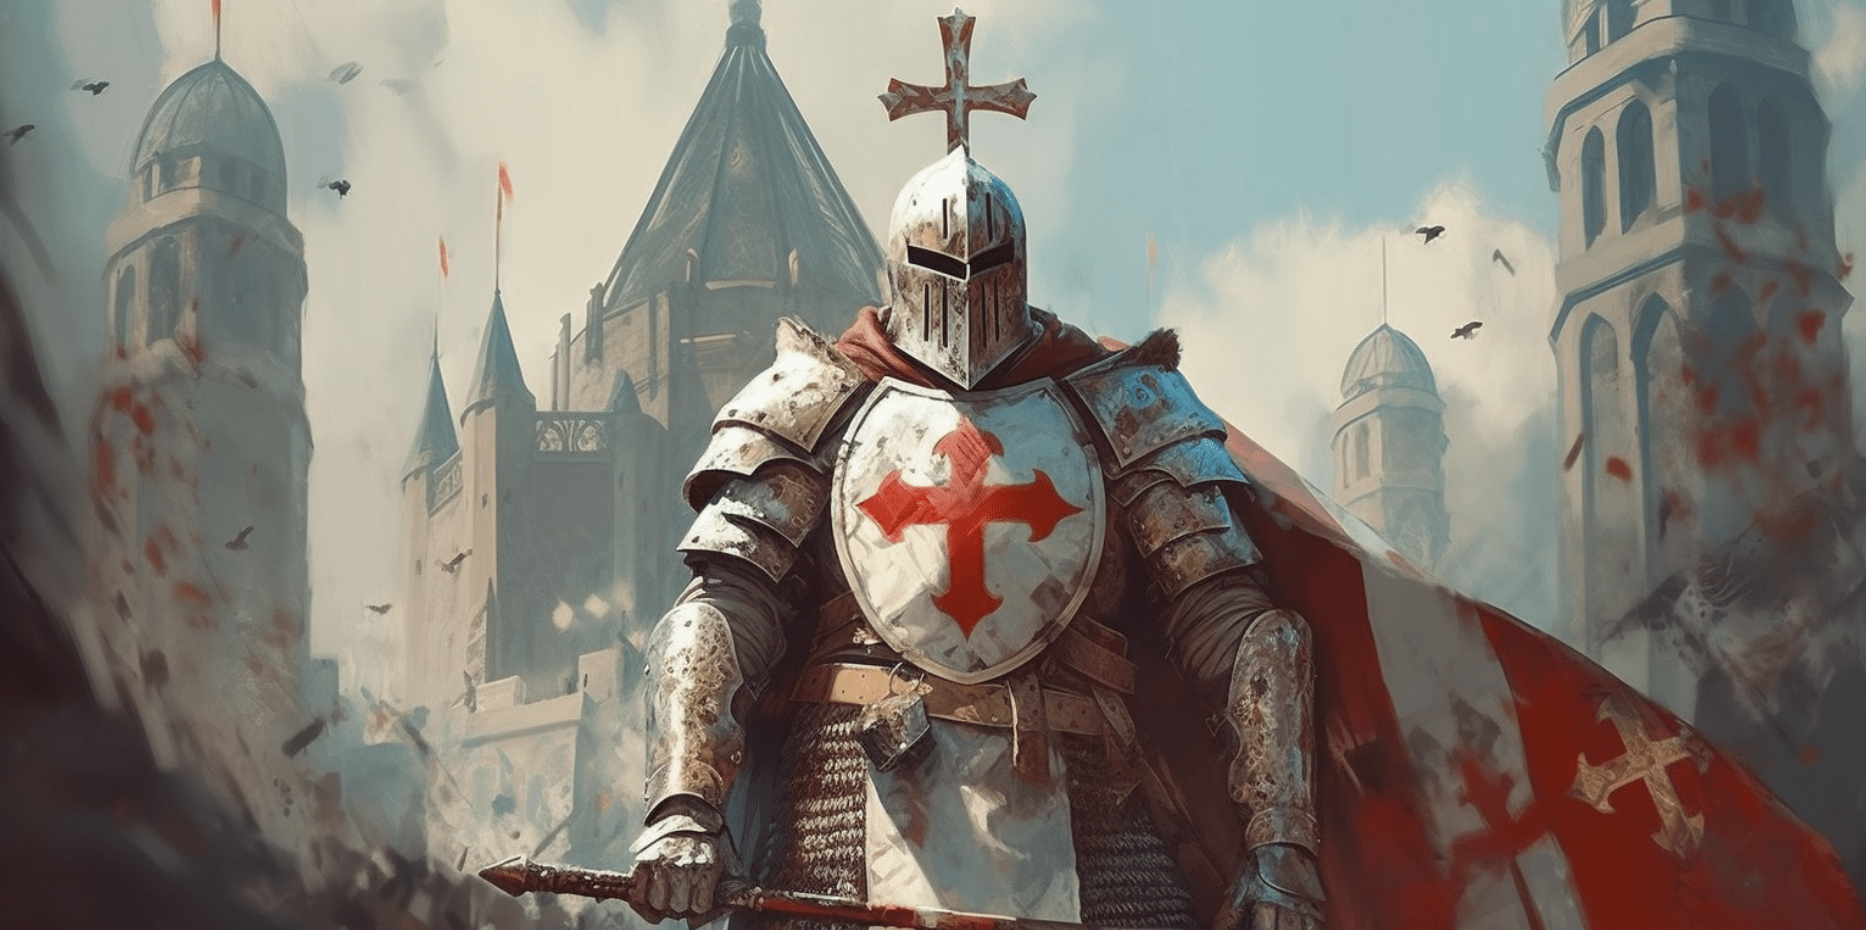 Jacques De Molay, Last Grand Master of the Knights Templar